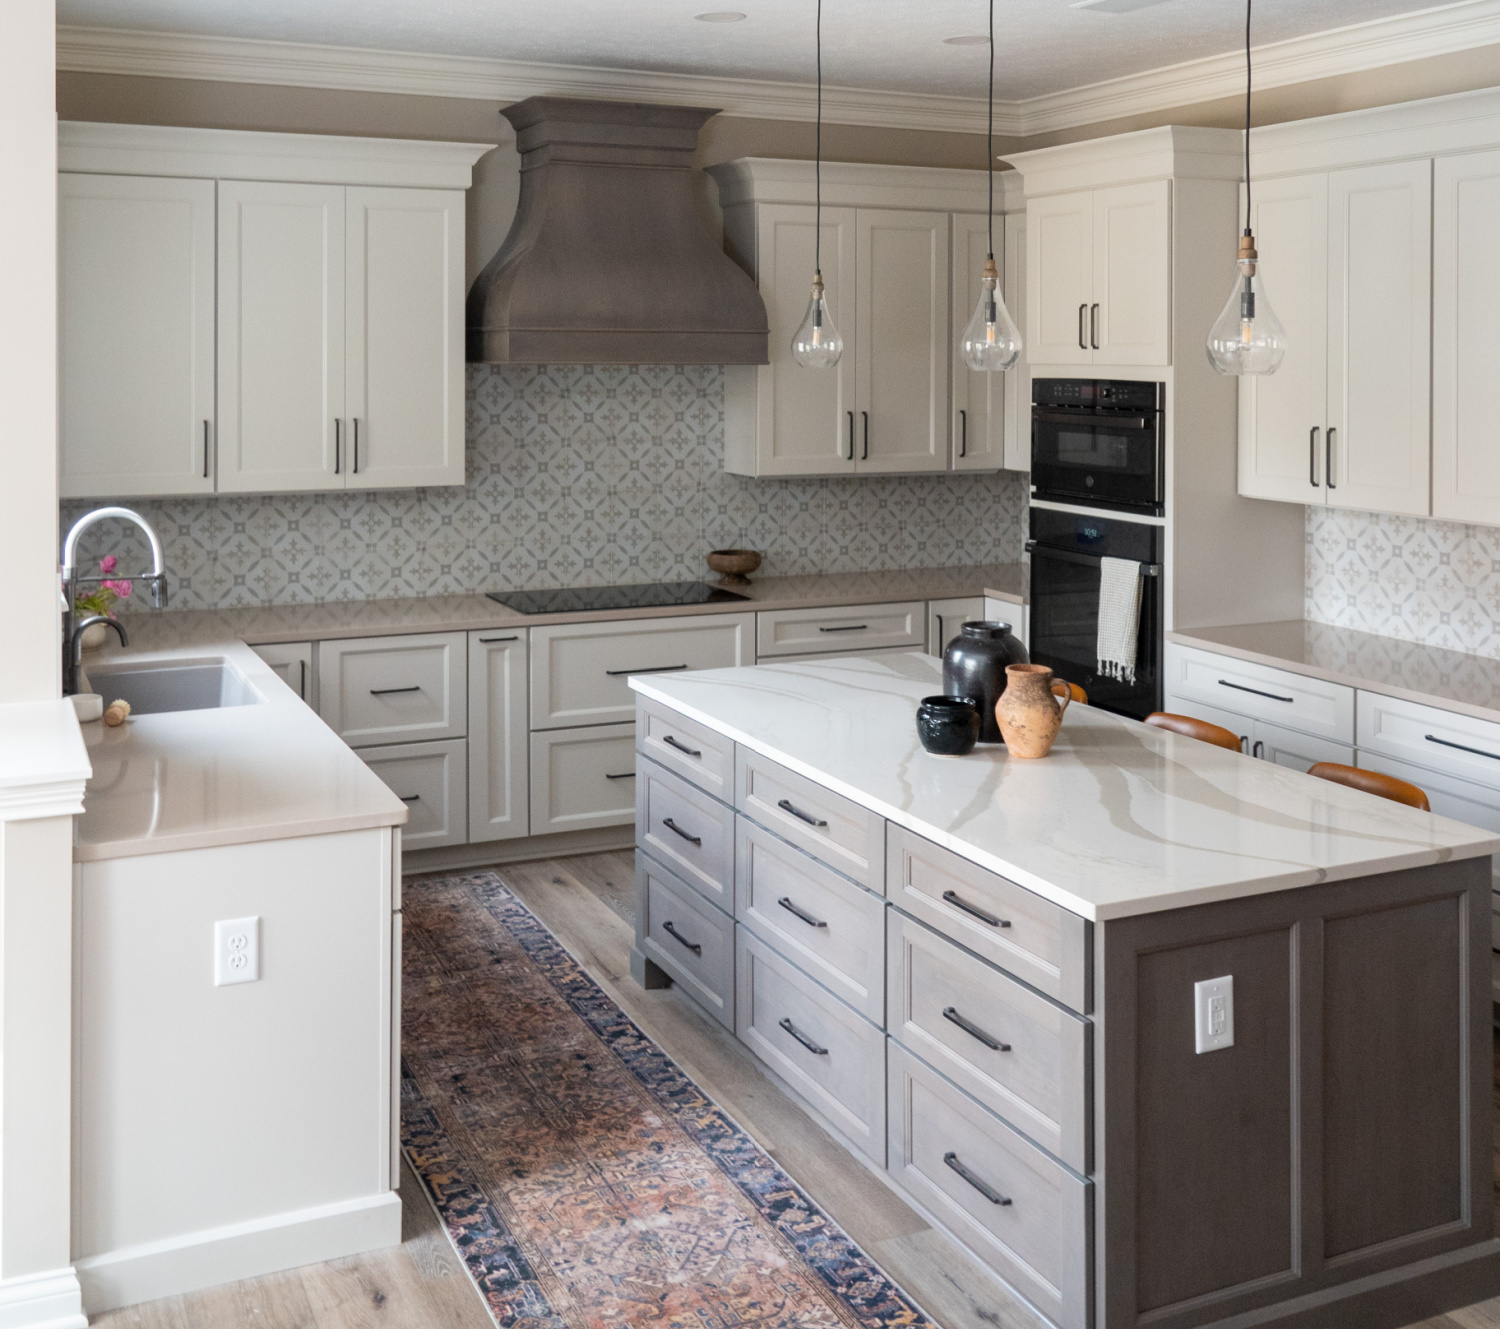 Nicholas Design Build | A kitchen remodel with white cabinets and a center island.